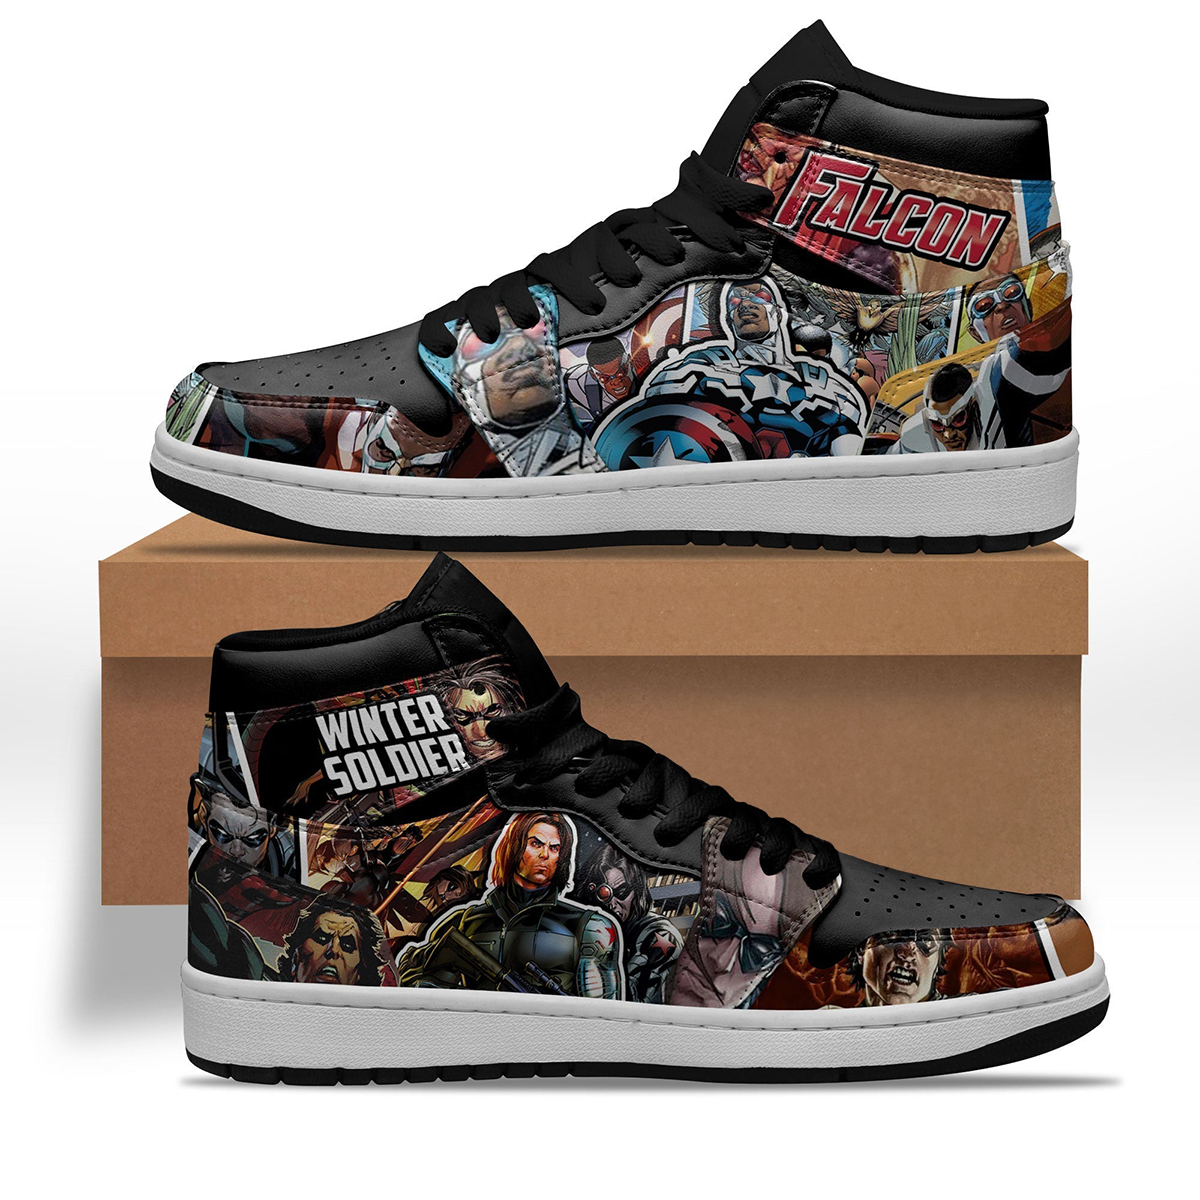 Falcon and Winter Soldier Sneakers Custom Shoes